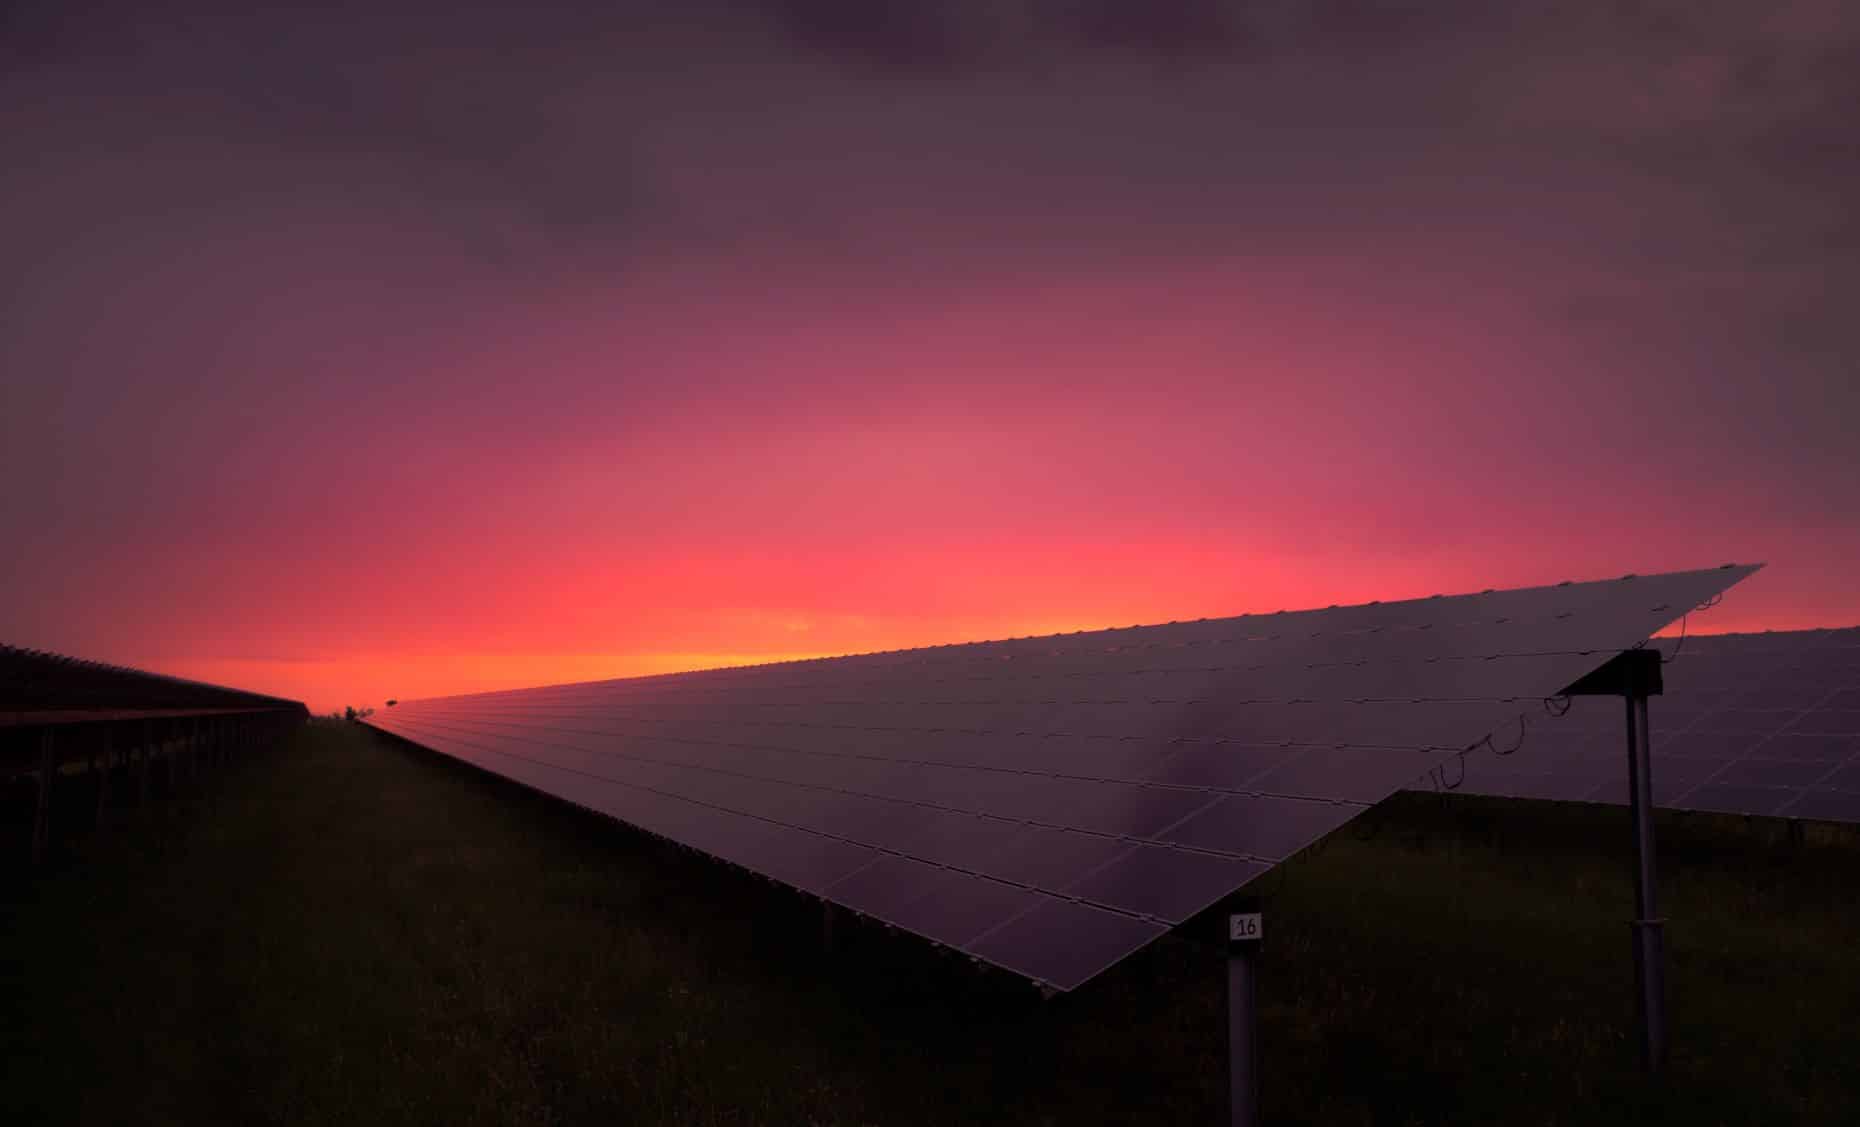 A solar panel at sunrise showing the need for storage and renewable energy